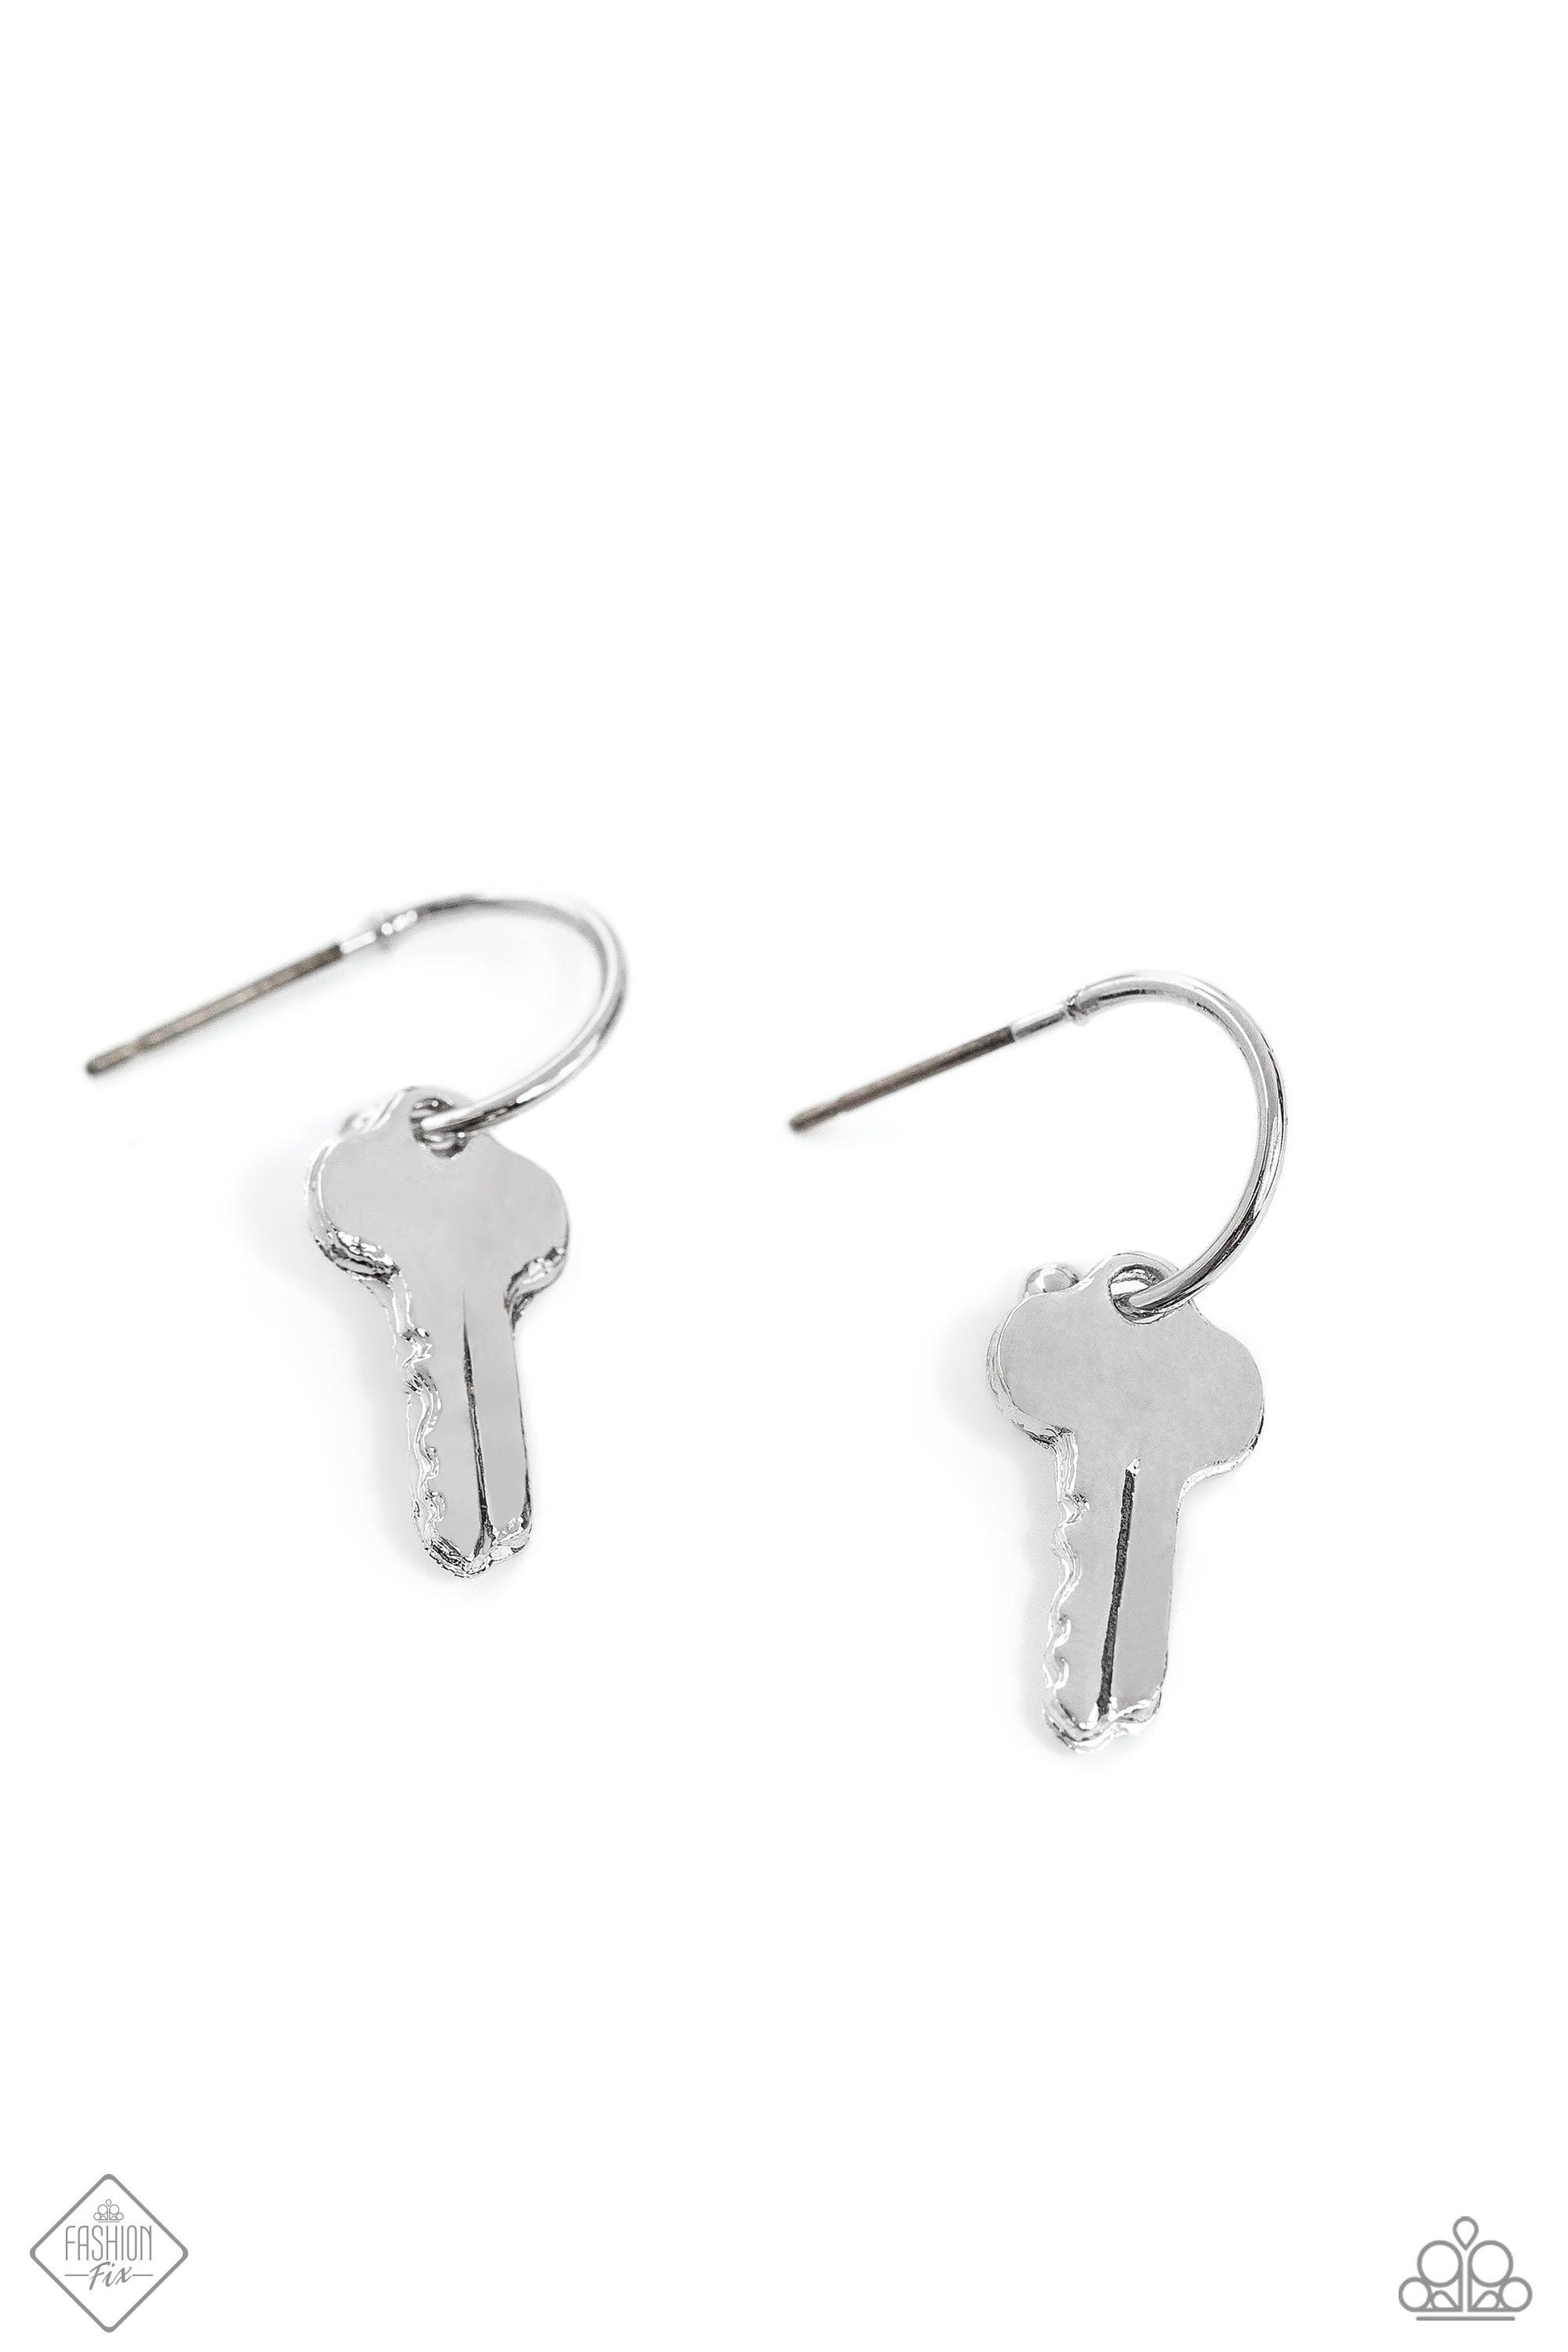 Paparazzi Accessories - The Key to Everything - Silver Earrings - Bling by JessieK